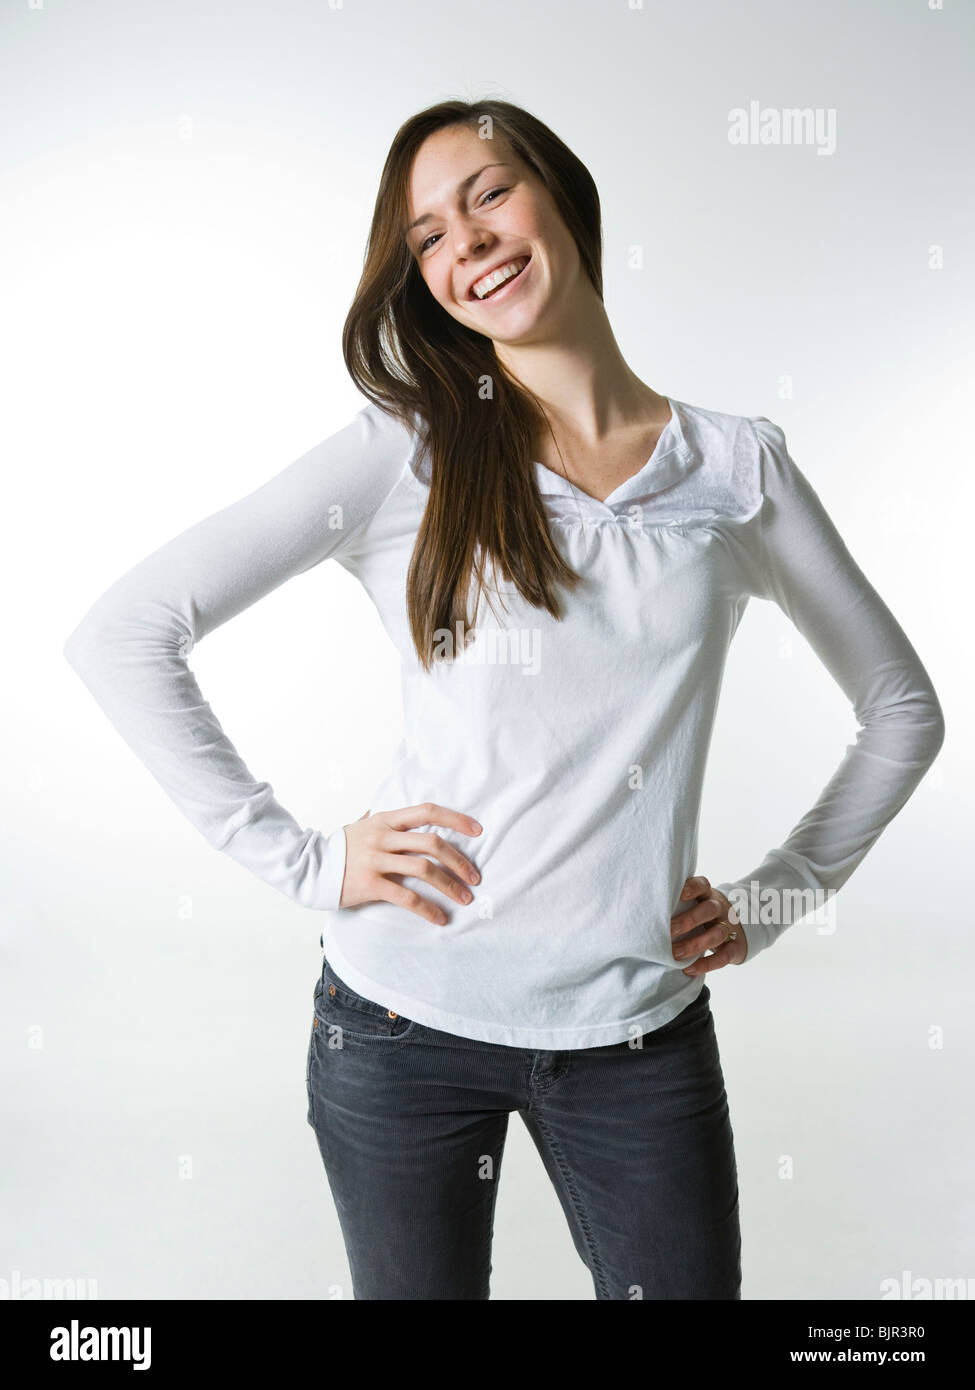 young woman with a white shirt, smiling. Stock Photo